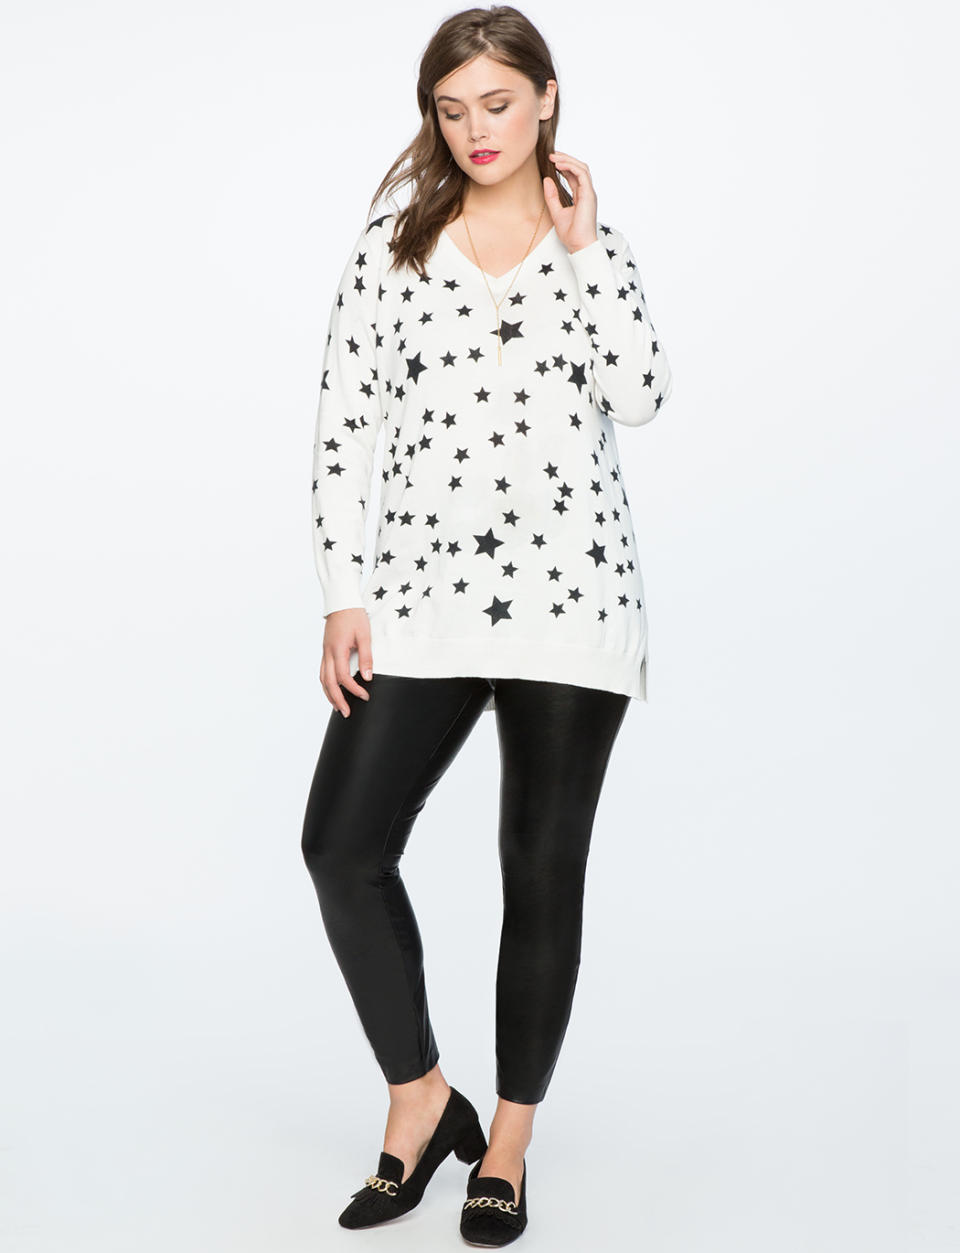 The Star-Printed Pullover